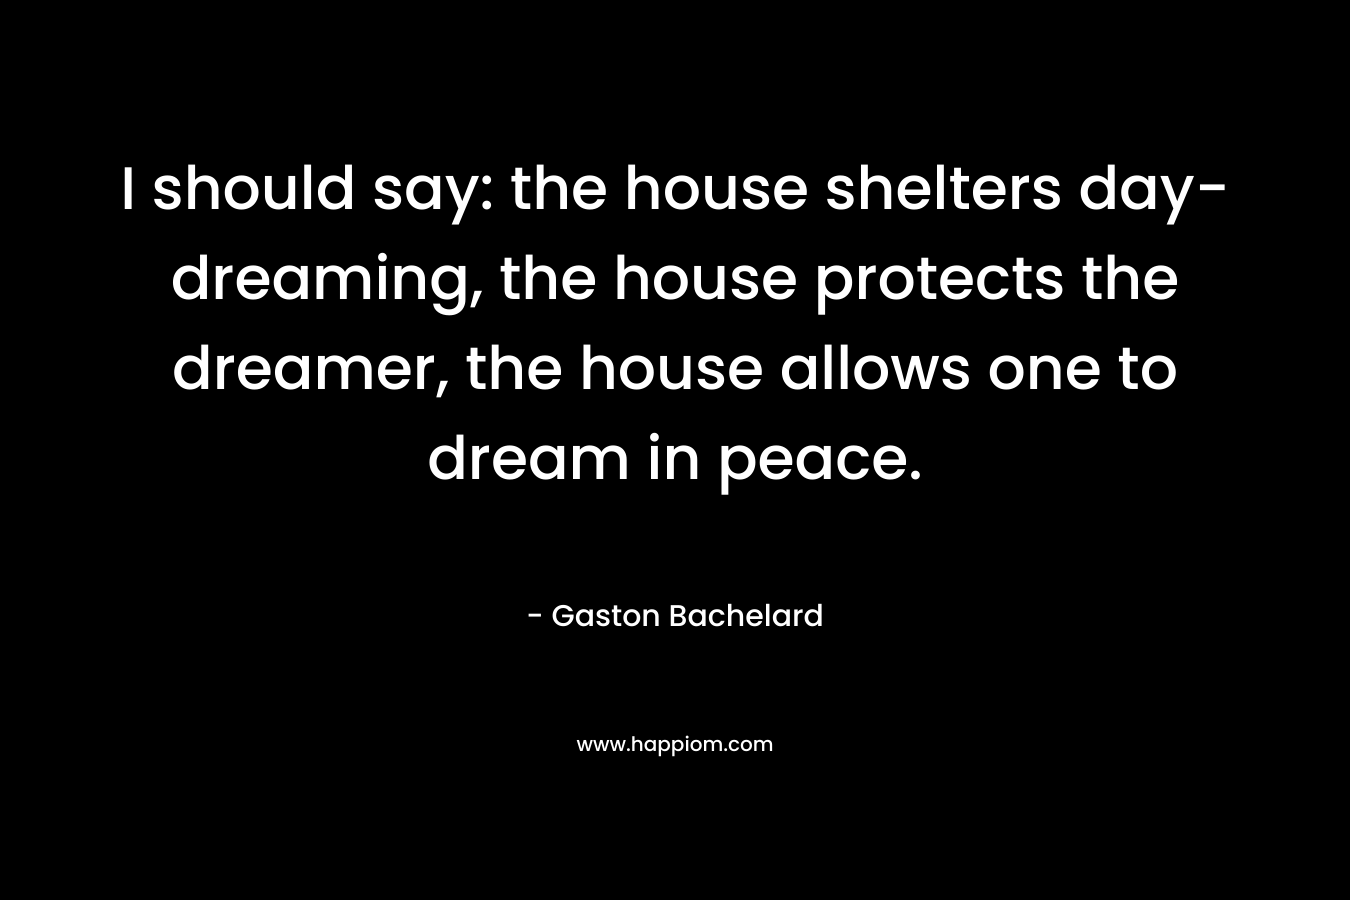 I should say: the house shelters day-dreaming, the house protects the dreamer, the house allows one to dream in peace. – Gaston Bachelard